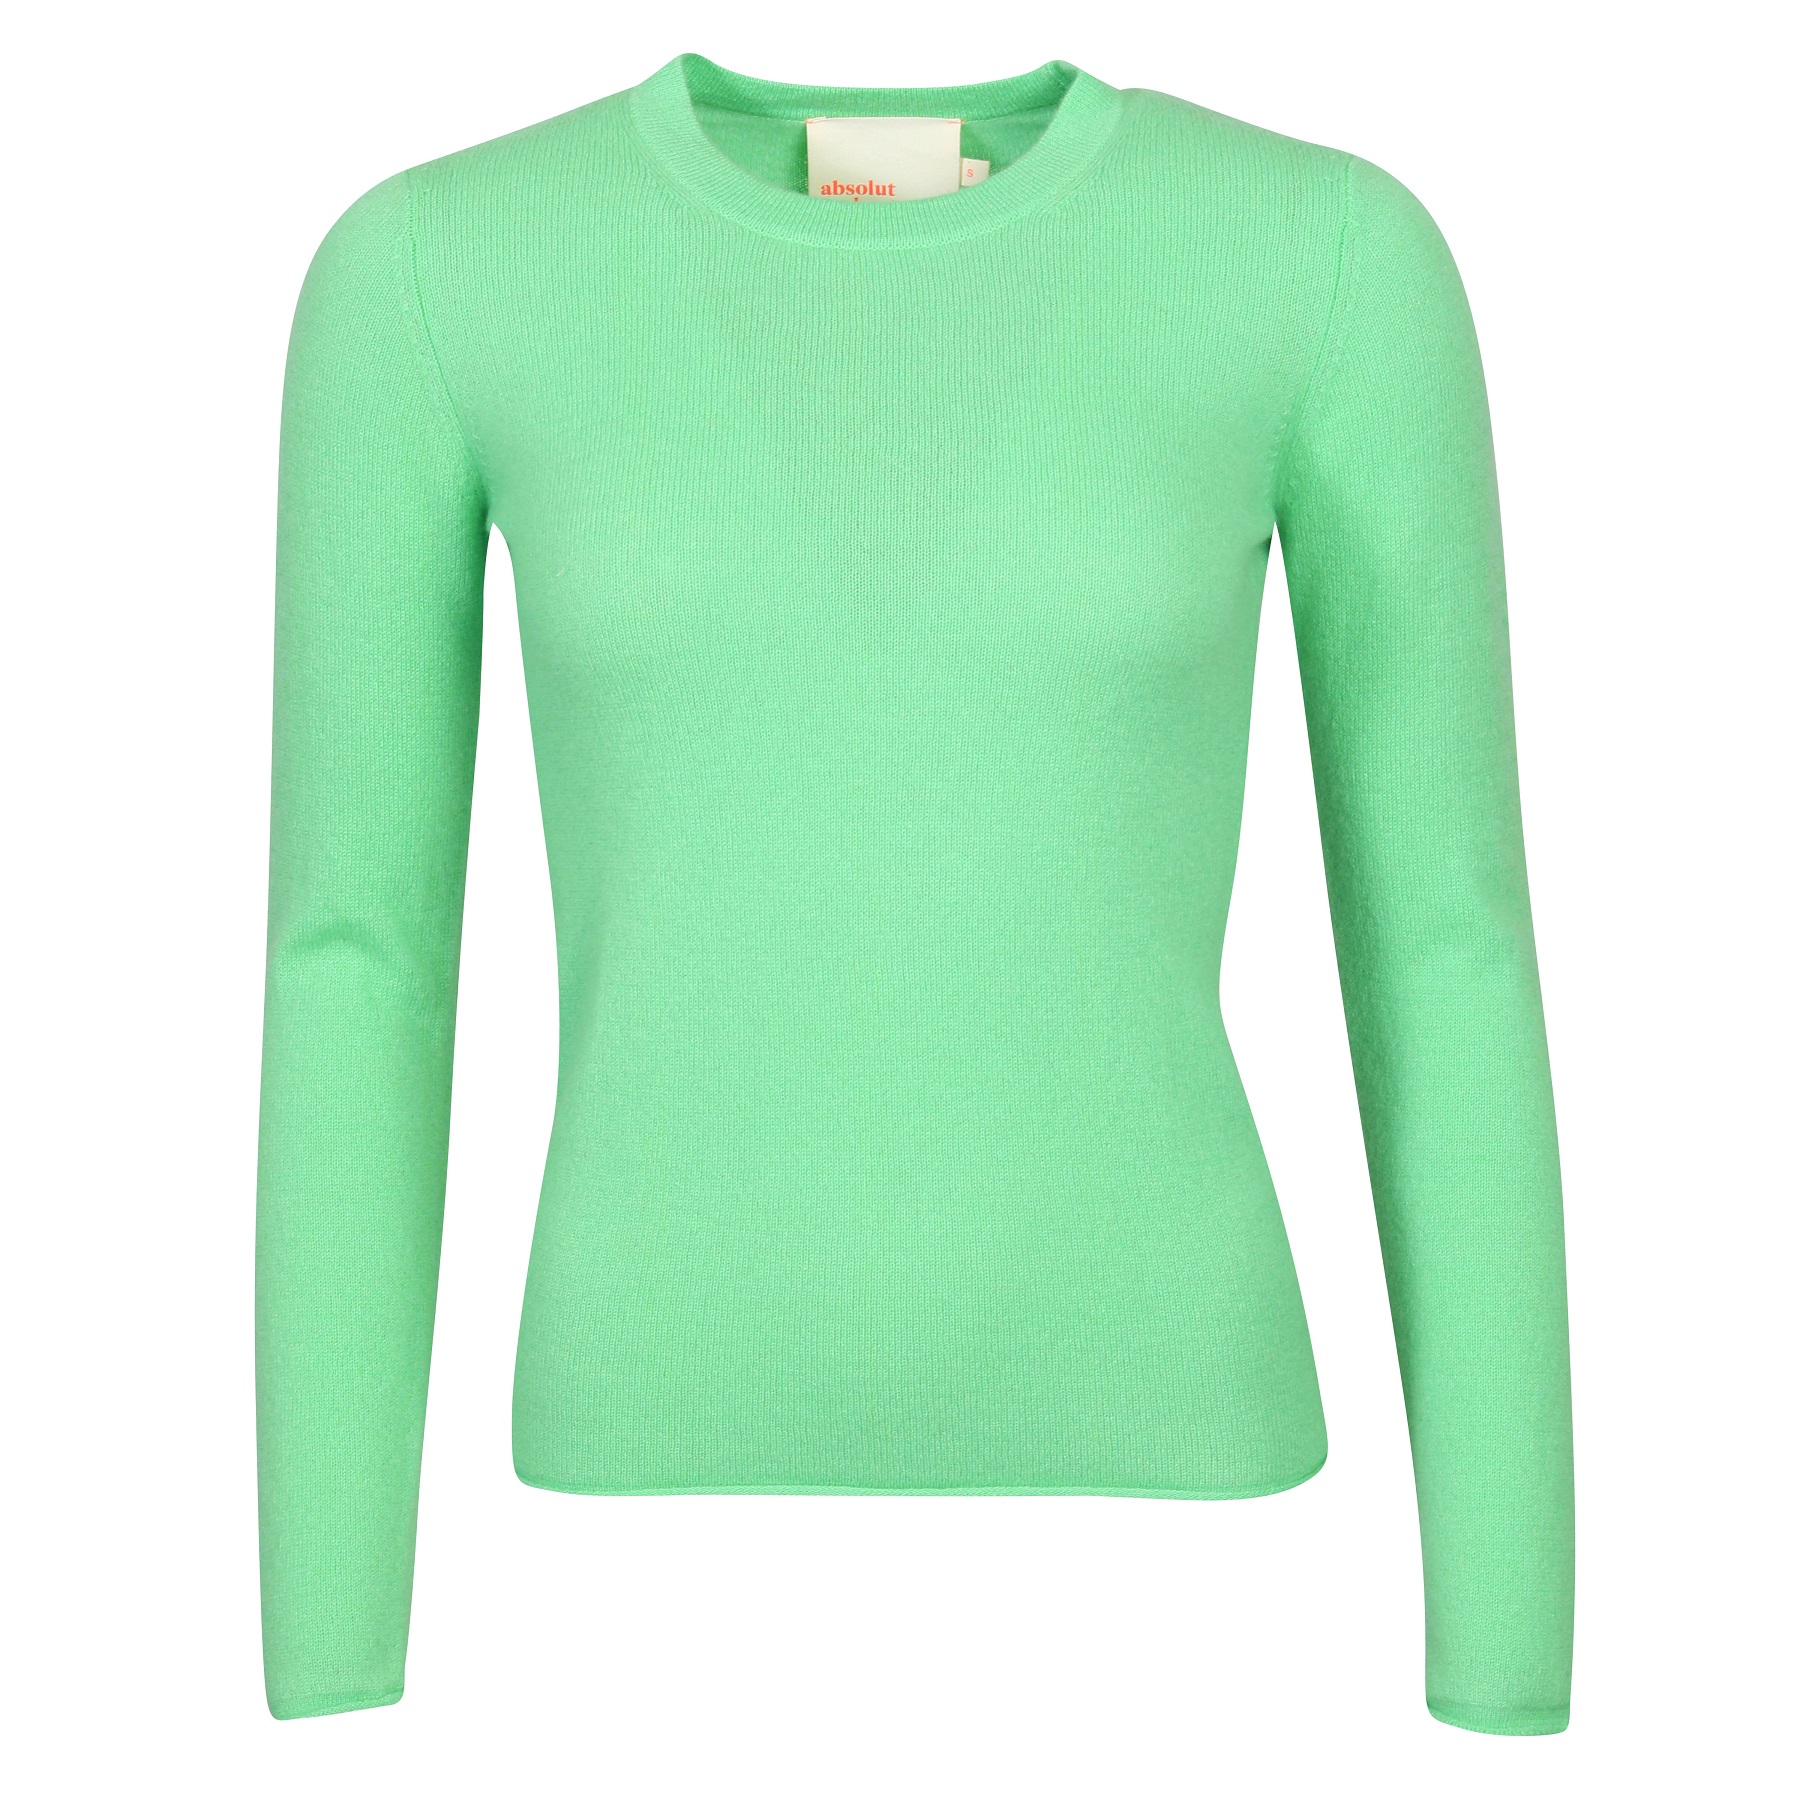 Absolut Cashmere Fitted Pullover in Light Green S